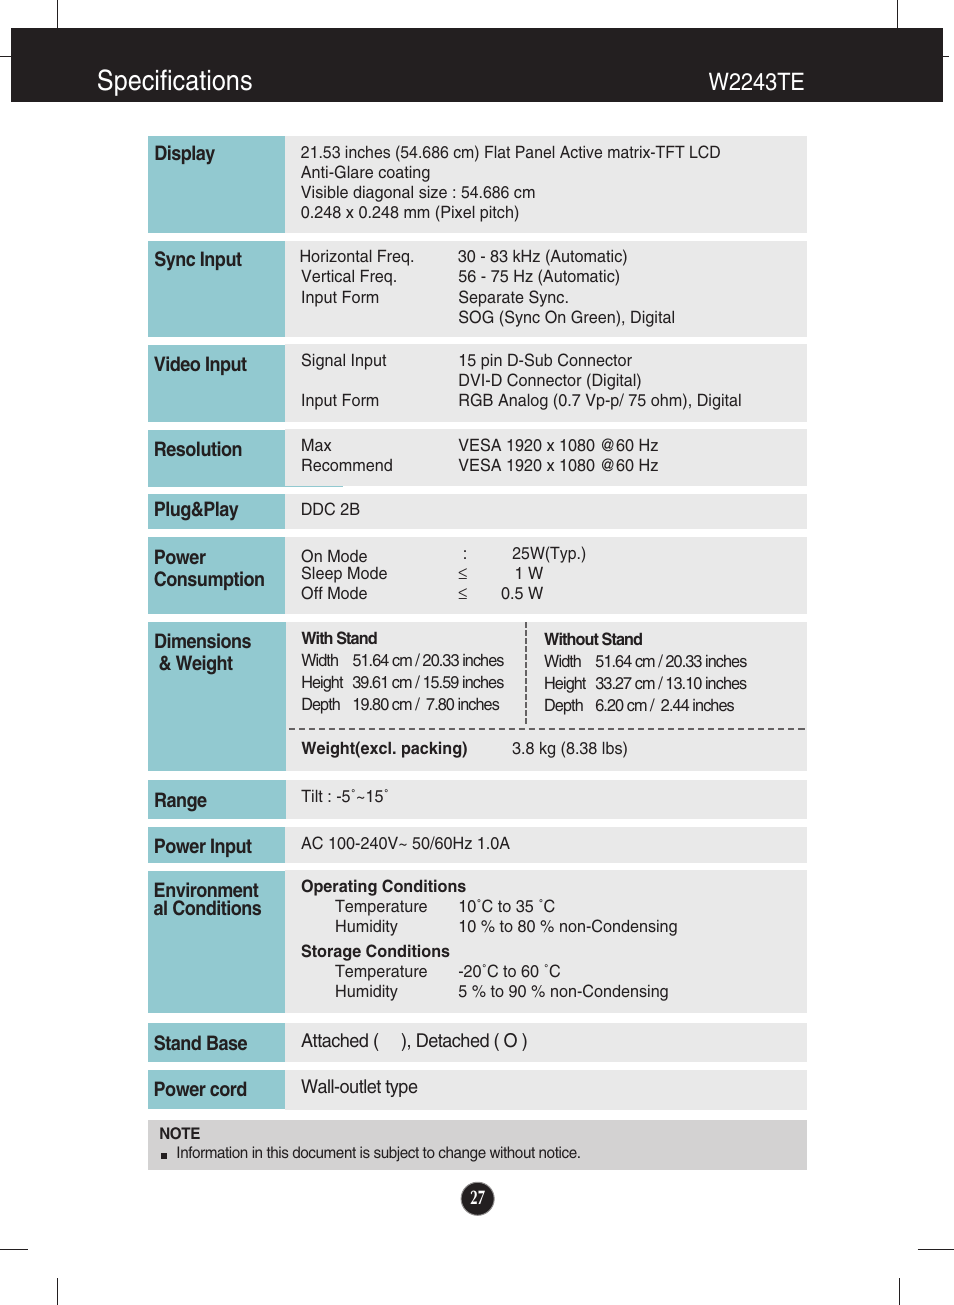 W2243te, Specifications | LG W2043SE-PF User Manual | Page 28 / 34